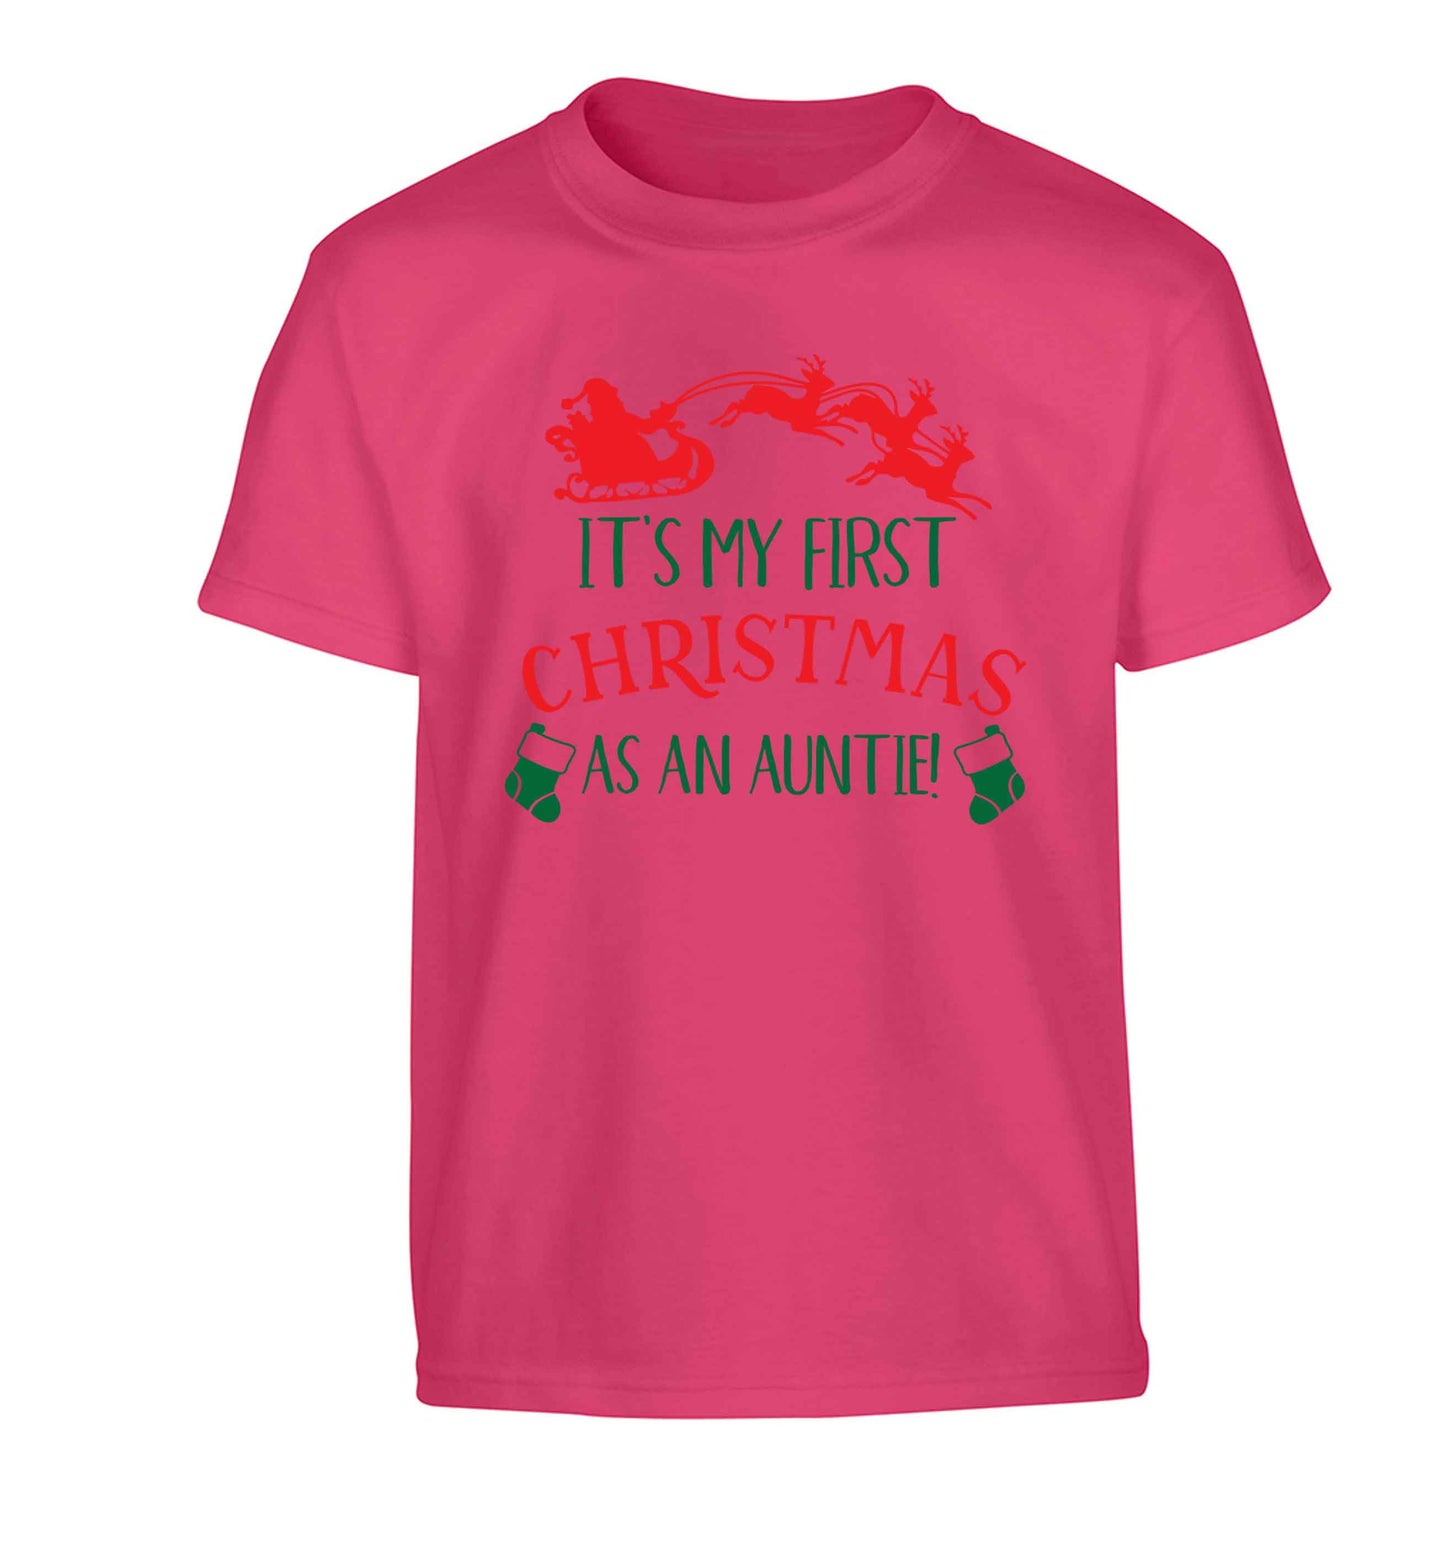 It's my first Christmas as an auntie! Children's pink Tshirt 12-13 Years